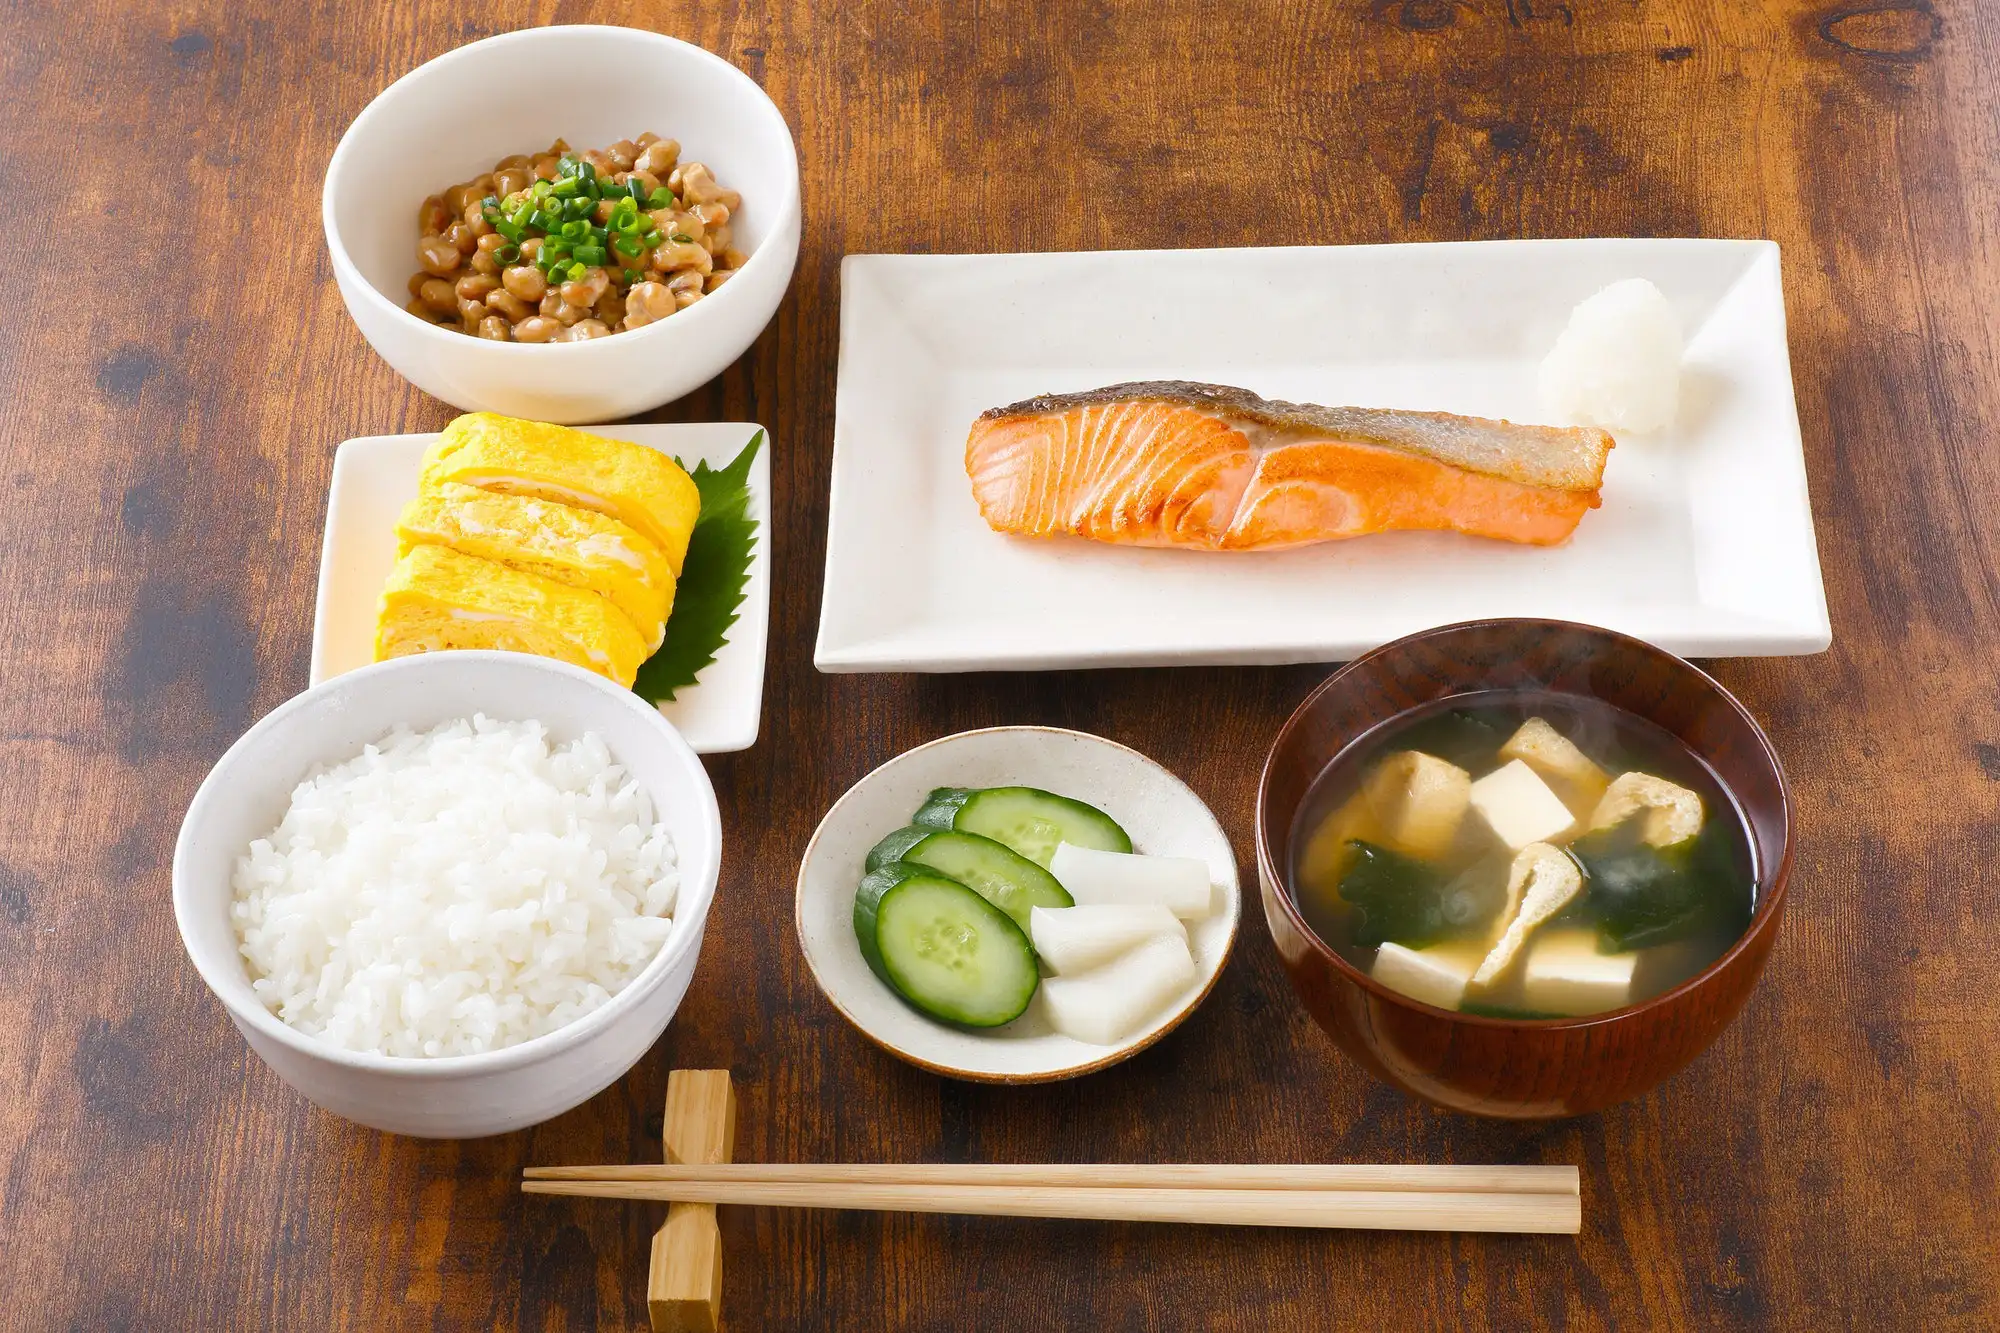 A Traditional Japanese Breakfast Is the Source of Energy for the Japanese!  Enjoy a Classic Japanese Menu of Rice Served in an Earthenware Pot, Miso  Soup, Grilled Fish, and Tamagoyaki! - Food